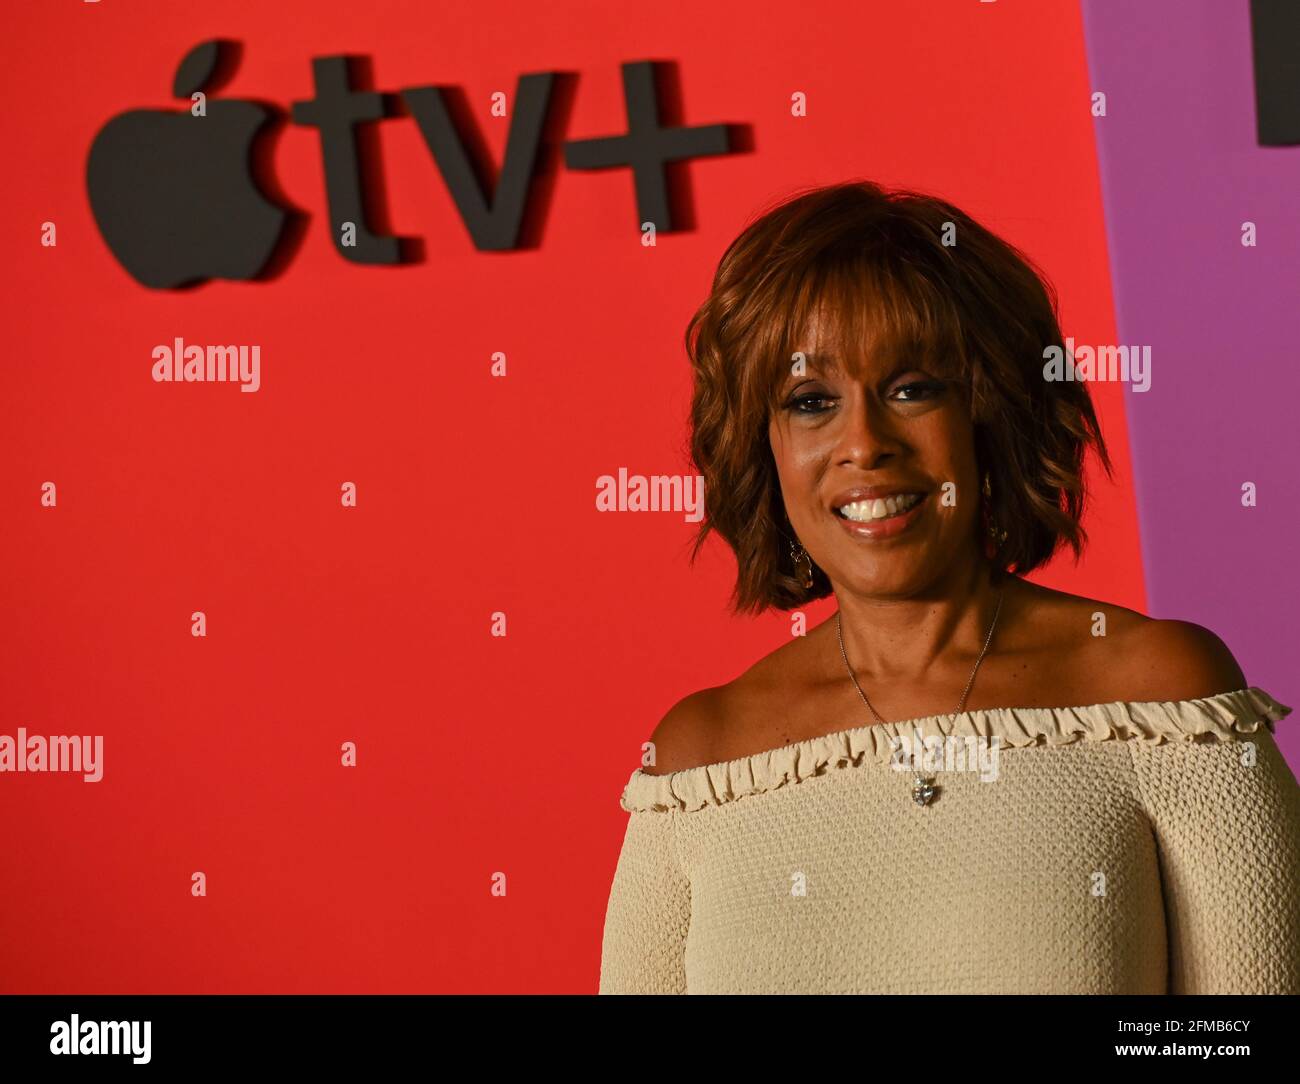 Gayle King arrives to The Morning Show New York Premiere by APPLE TV, held at Lincoln Center in New York City, Monday, October 28, 2019. Photo by Jennifer Graylock-Graylock.com 917-519-7666 Stock Photo